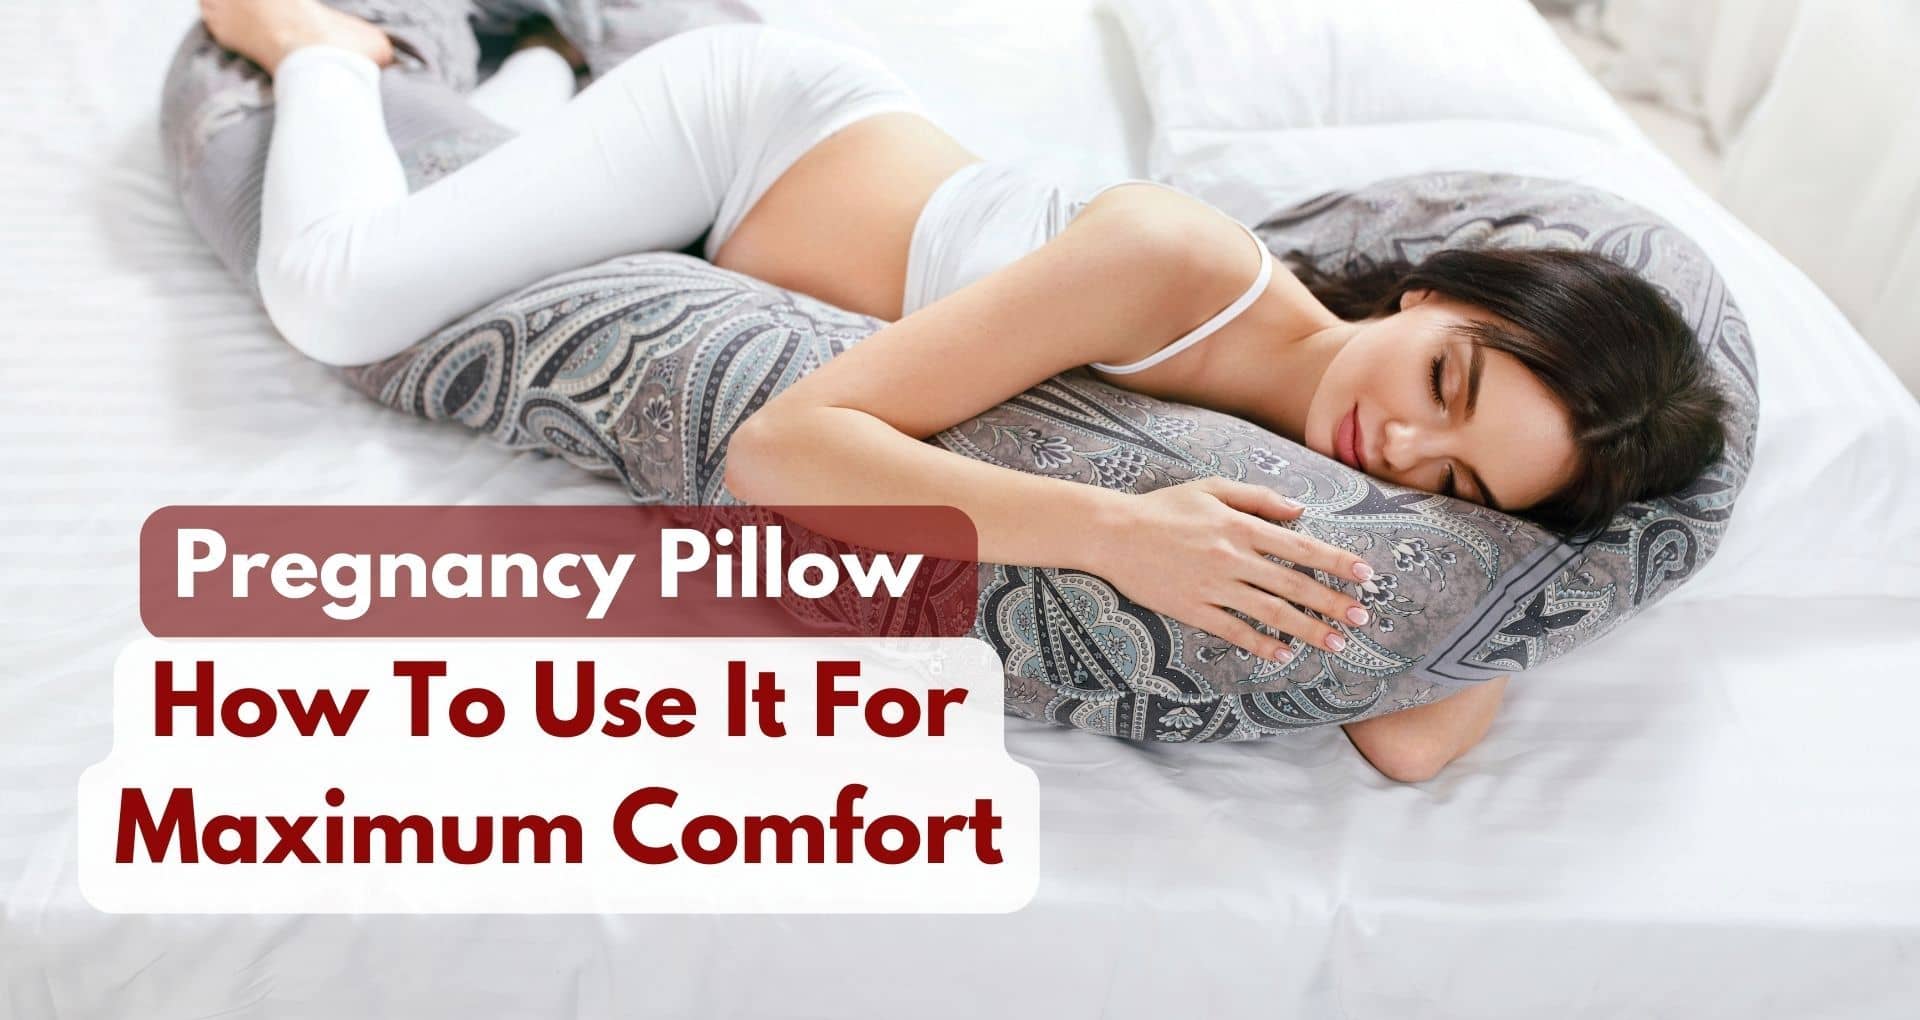 How To Use A Pregnancy Pillow For Maximum Comfort